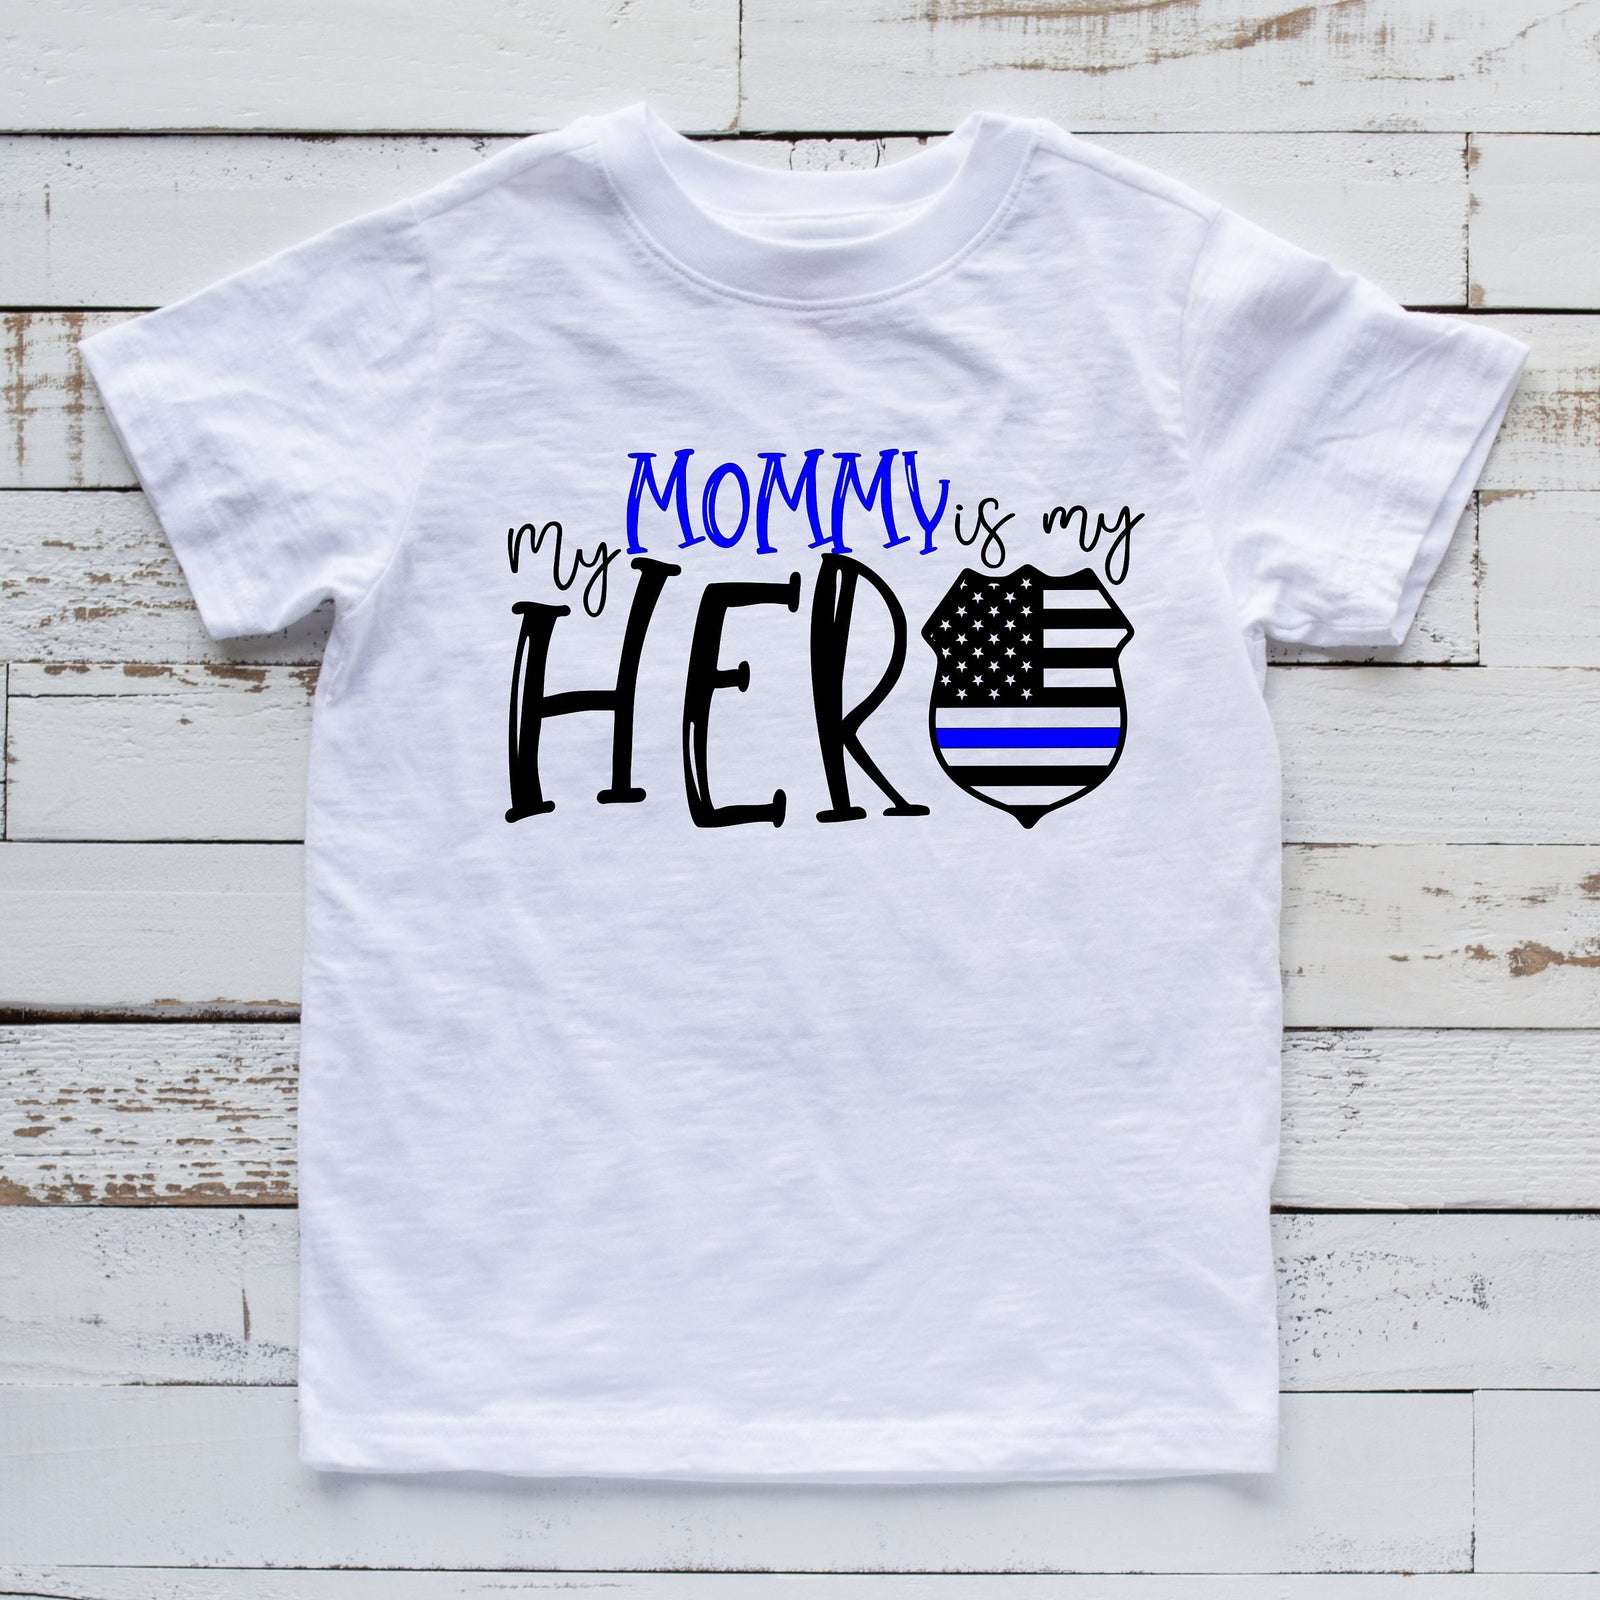 My Mommy is My Hero T Shirt - Police Officer Kids Shirt - Police Hero Shirt - Kids Police Statement Shirt